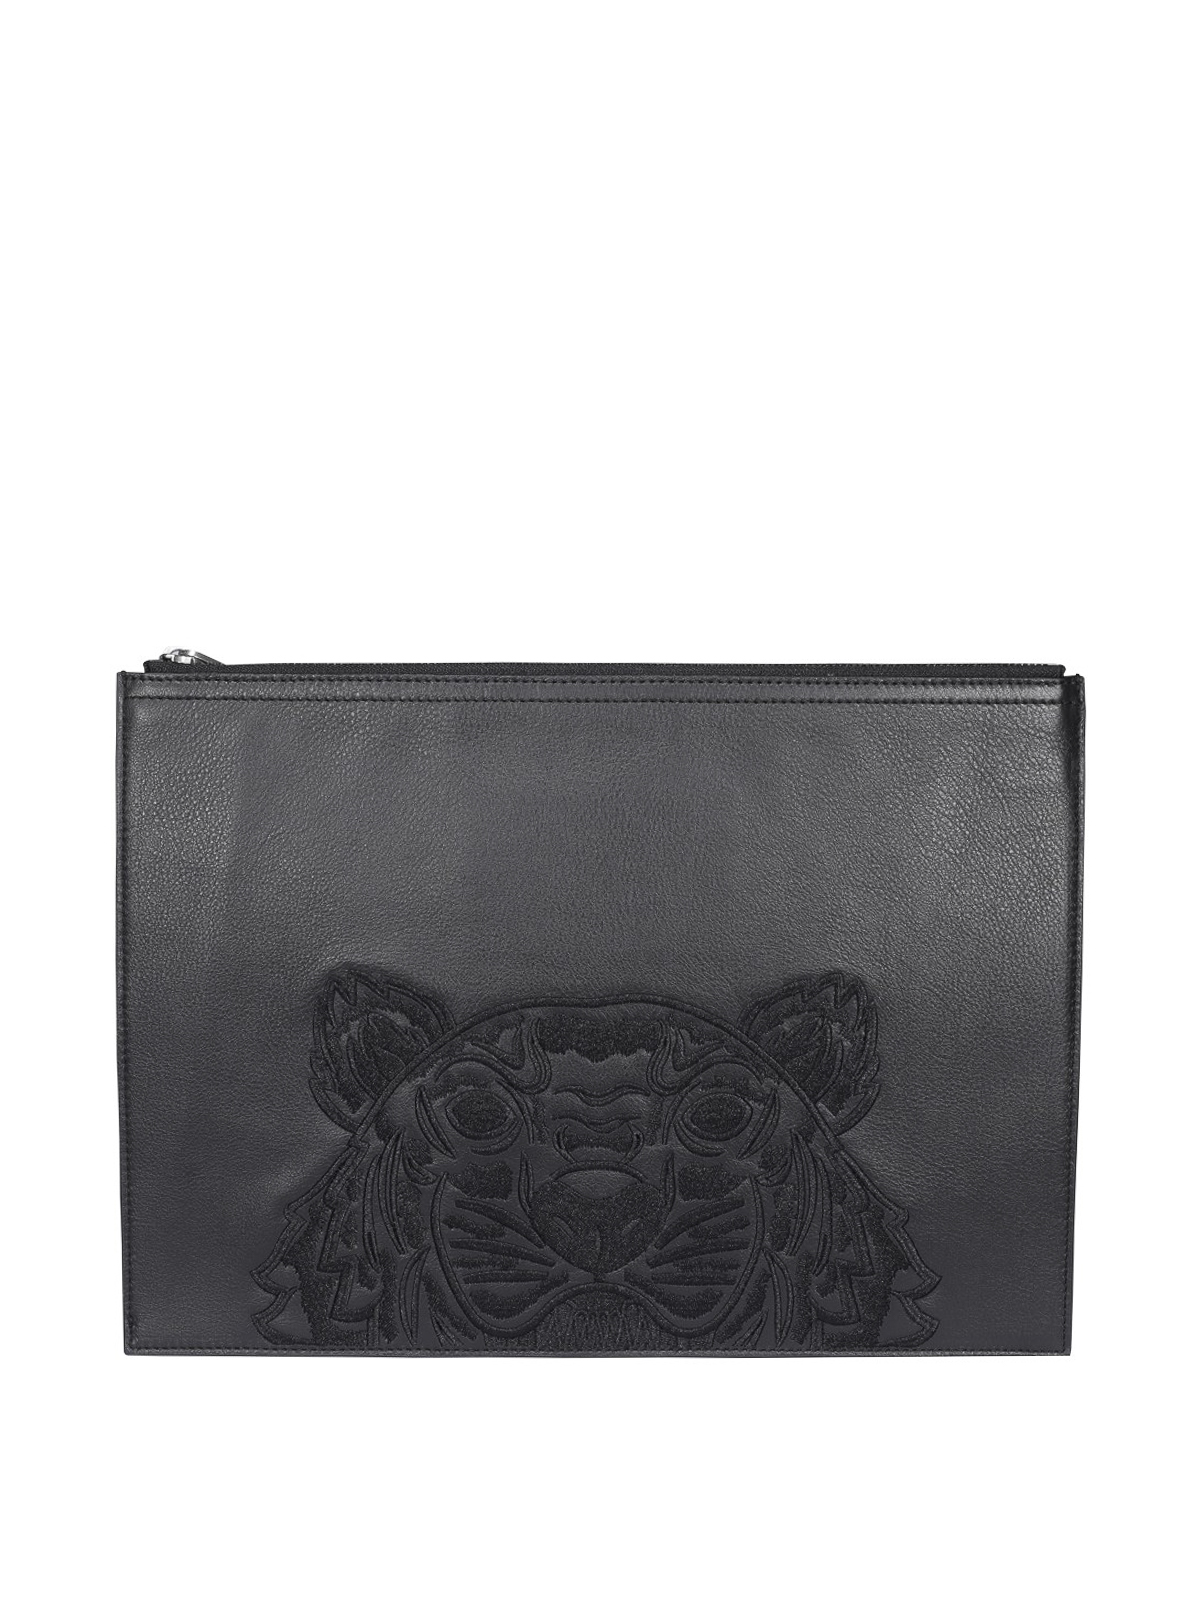 Kenzo Kampus Tiger Pouch In Black